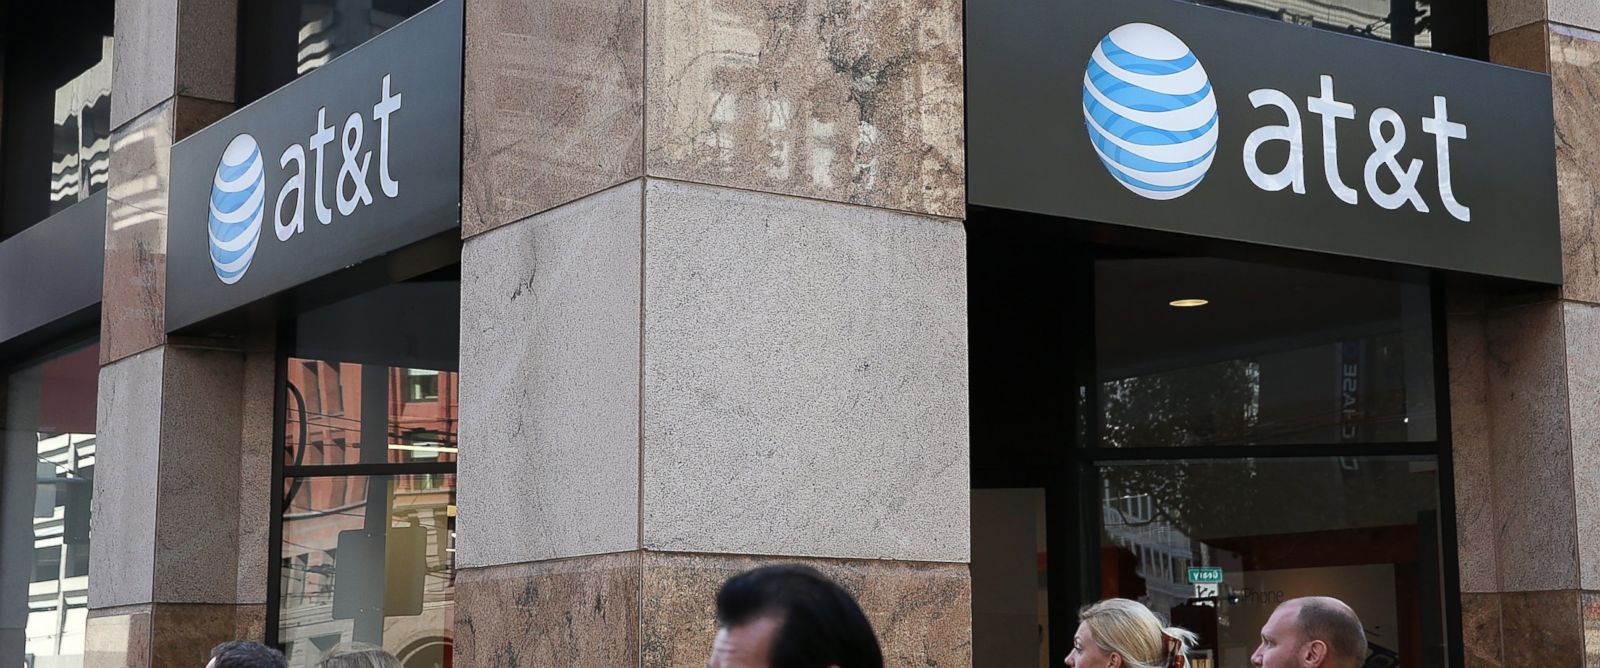 FTC Alleges AT&T Slowed Speeds for Unlimited Data Customers - ABC News